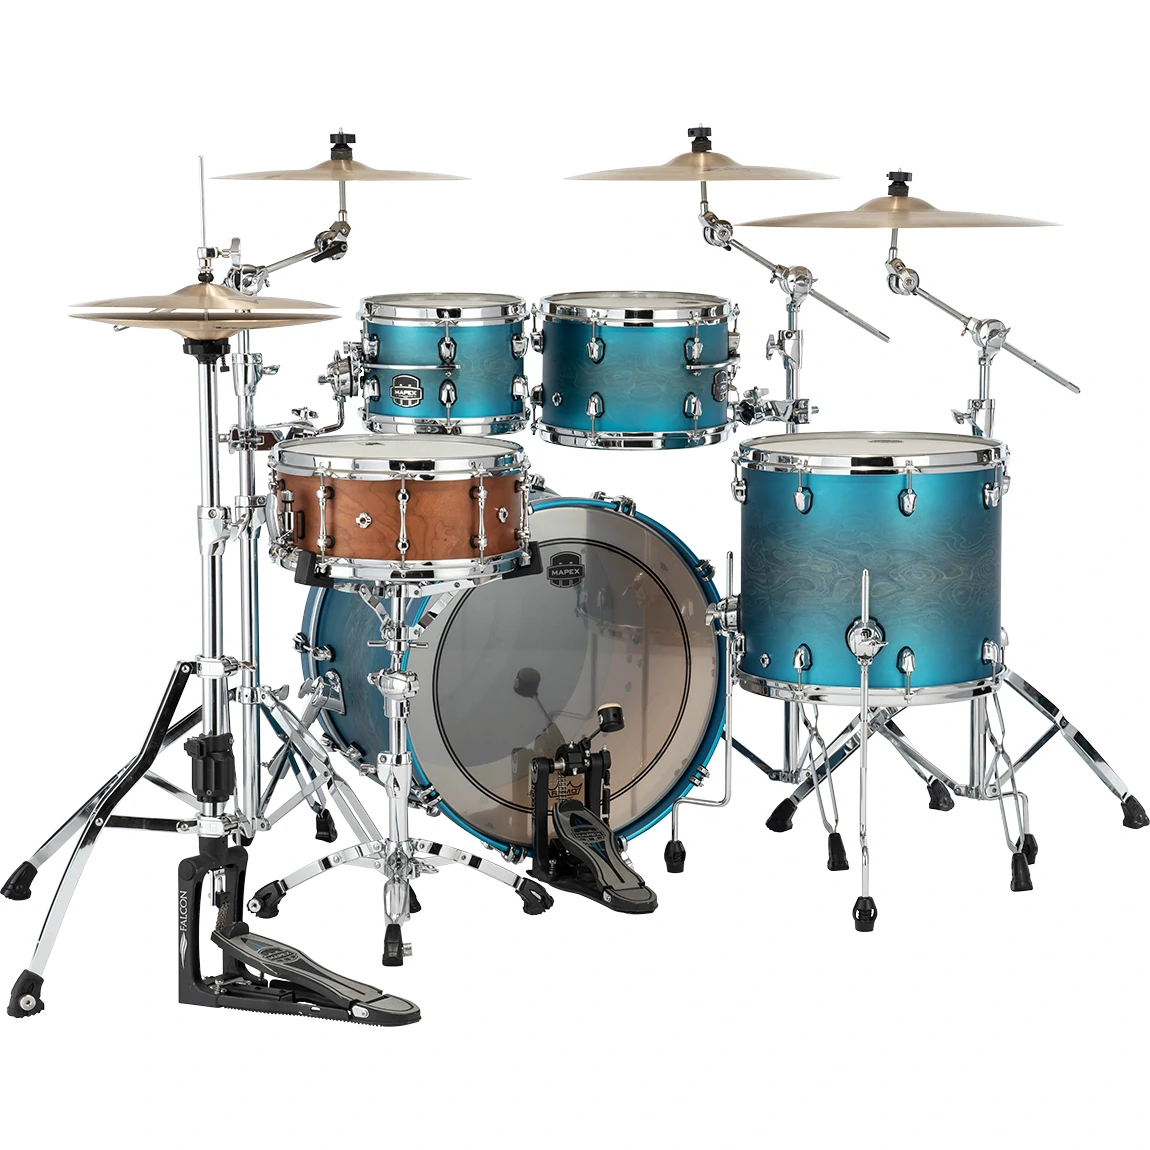 Mapex Saturn Evolution Classic Birch 4-Piece Shell Pack - Exotic Azure Burst Lacquer